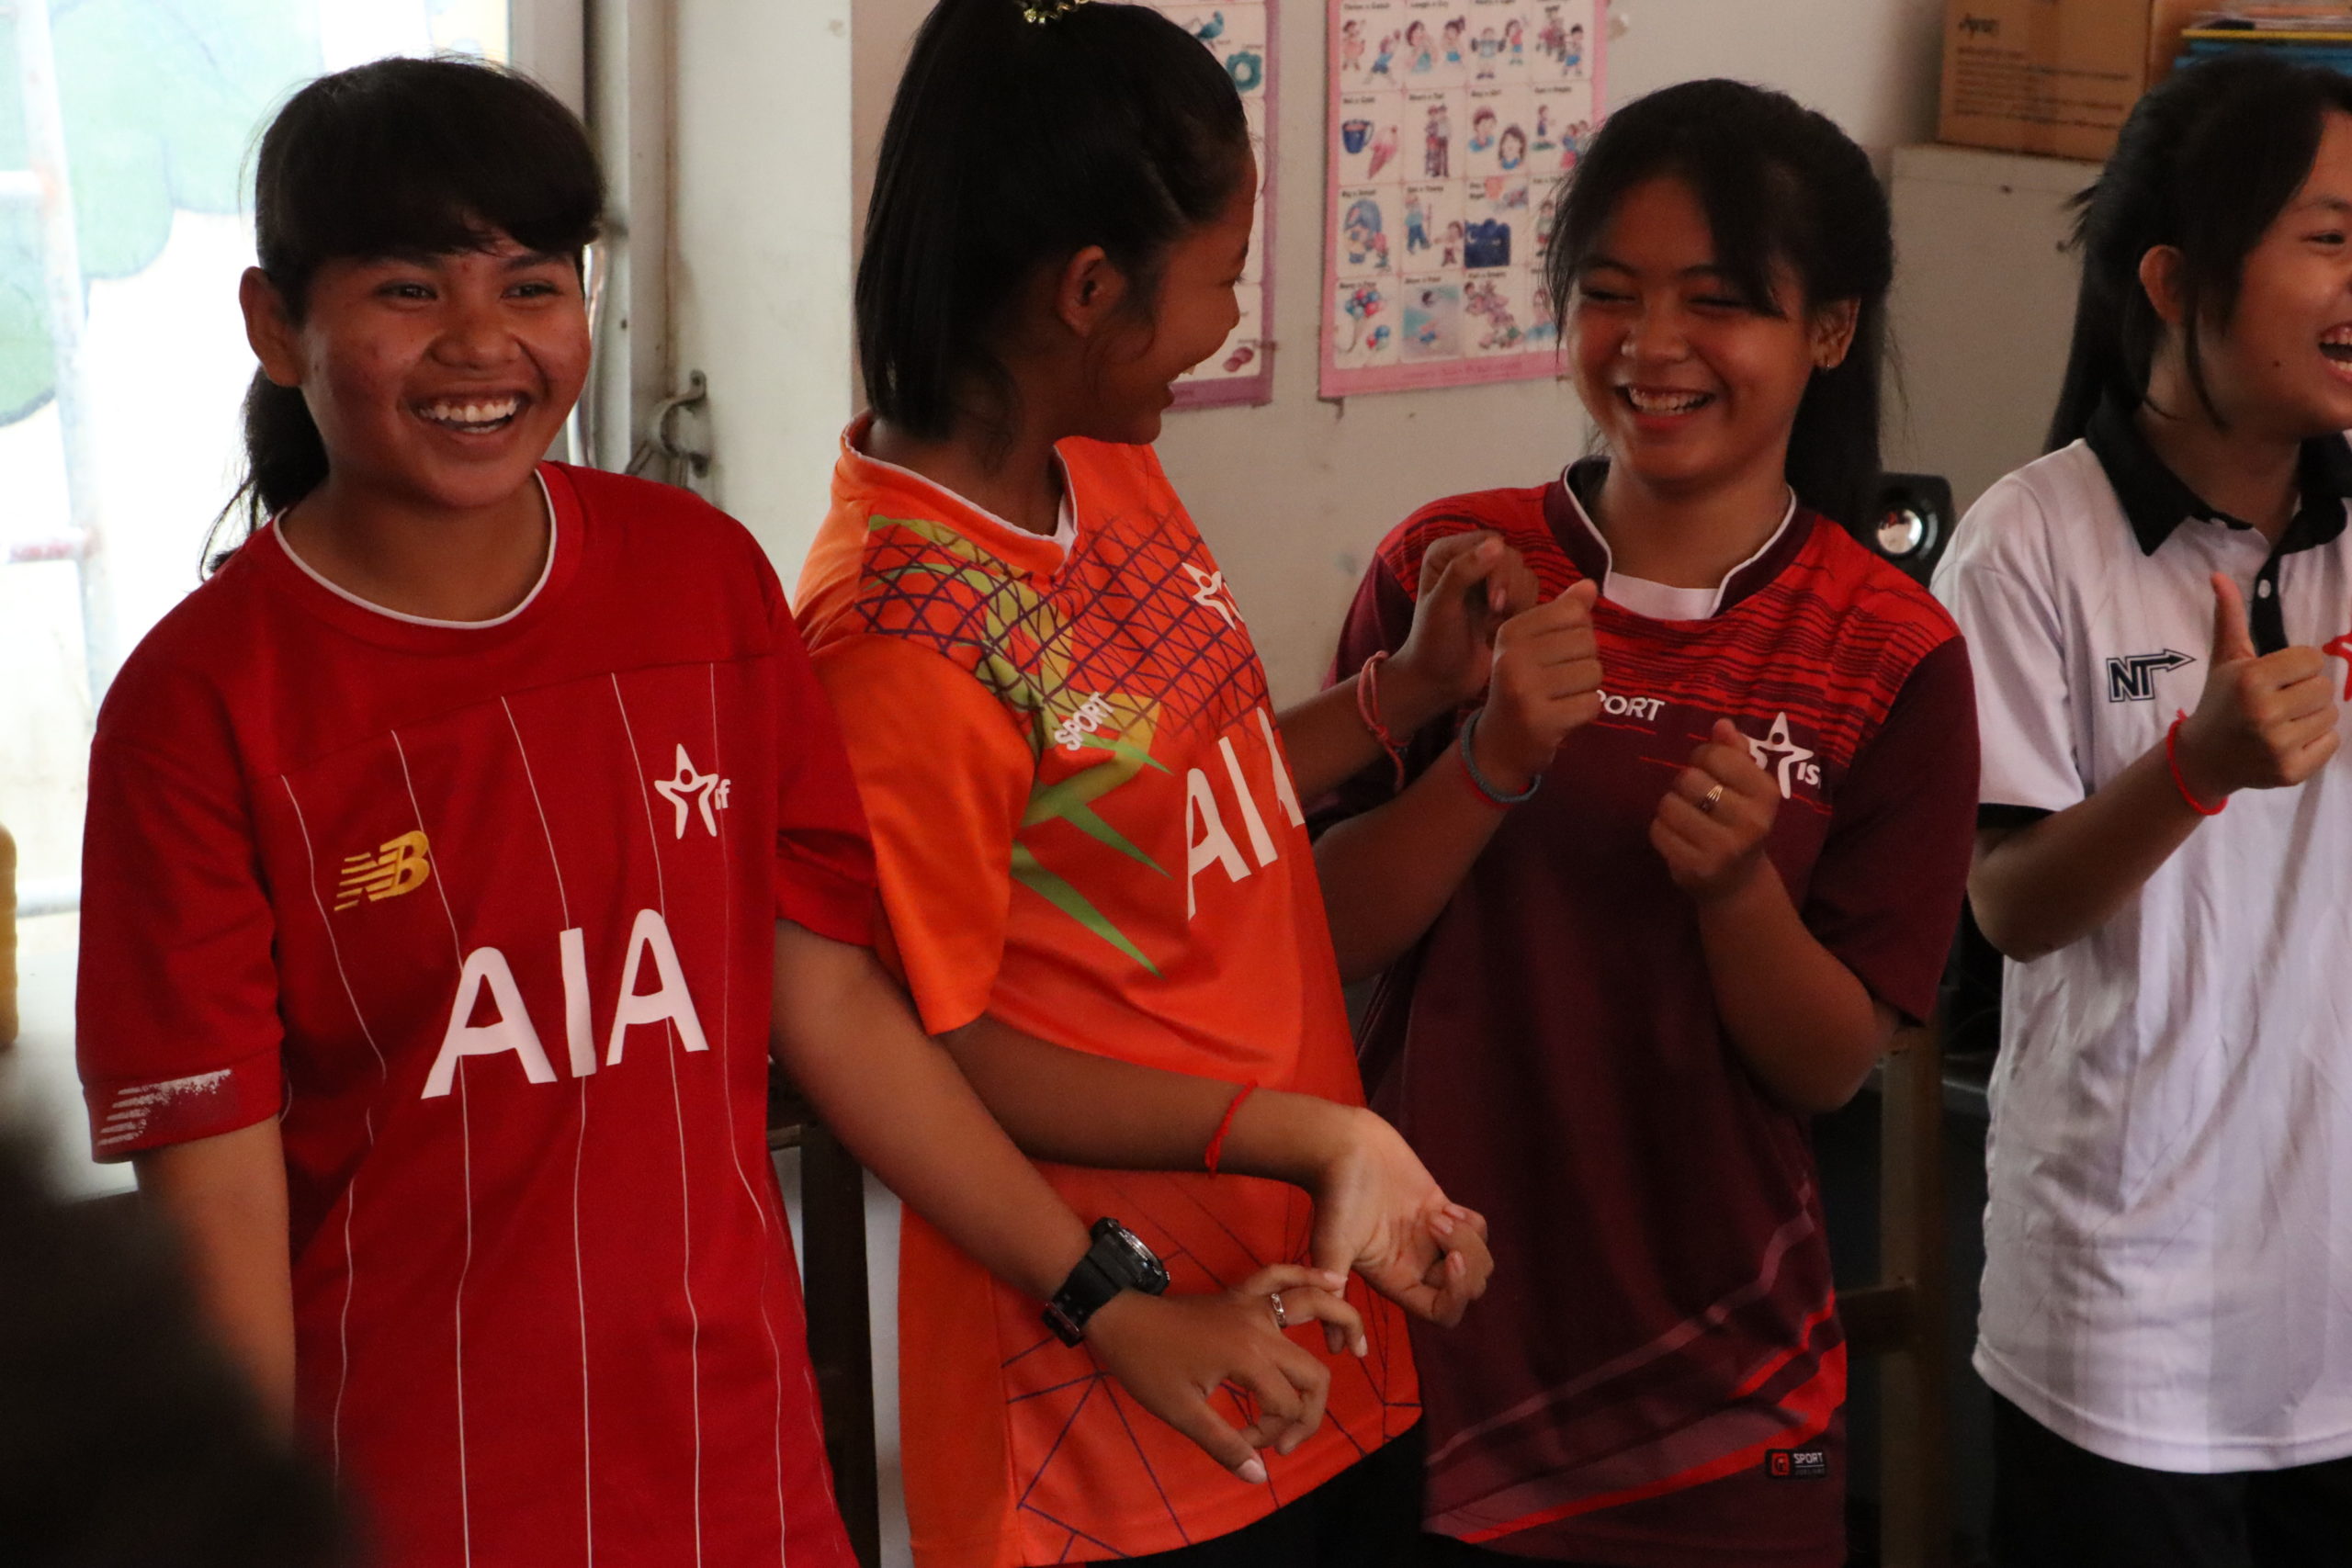 Participants at an ISF school event in Phnom Penh, Cambodia